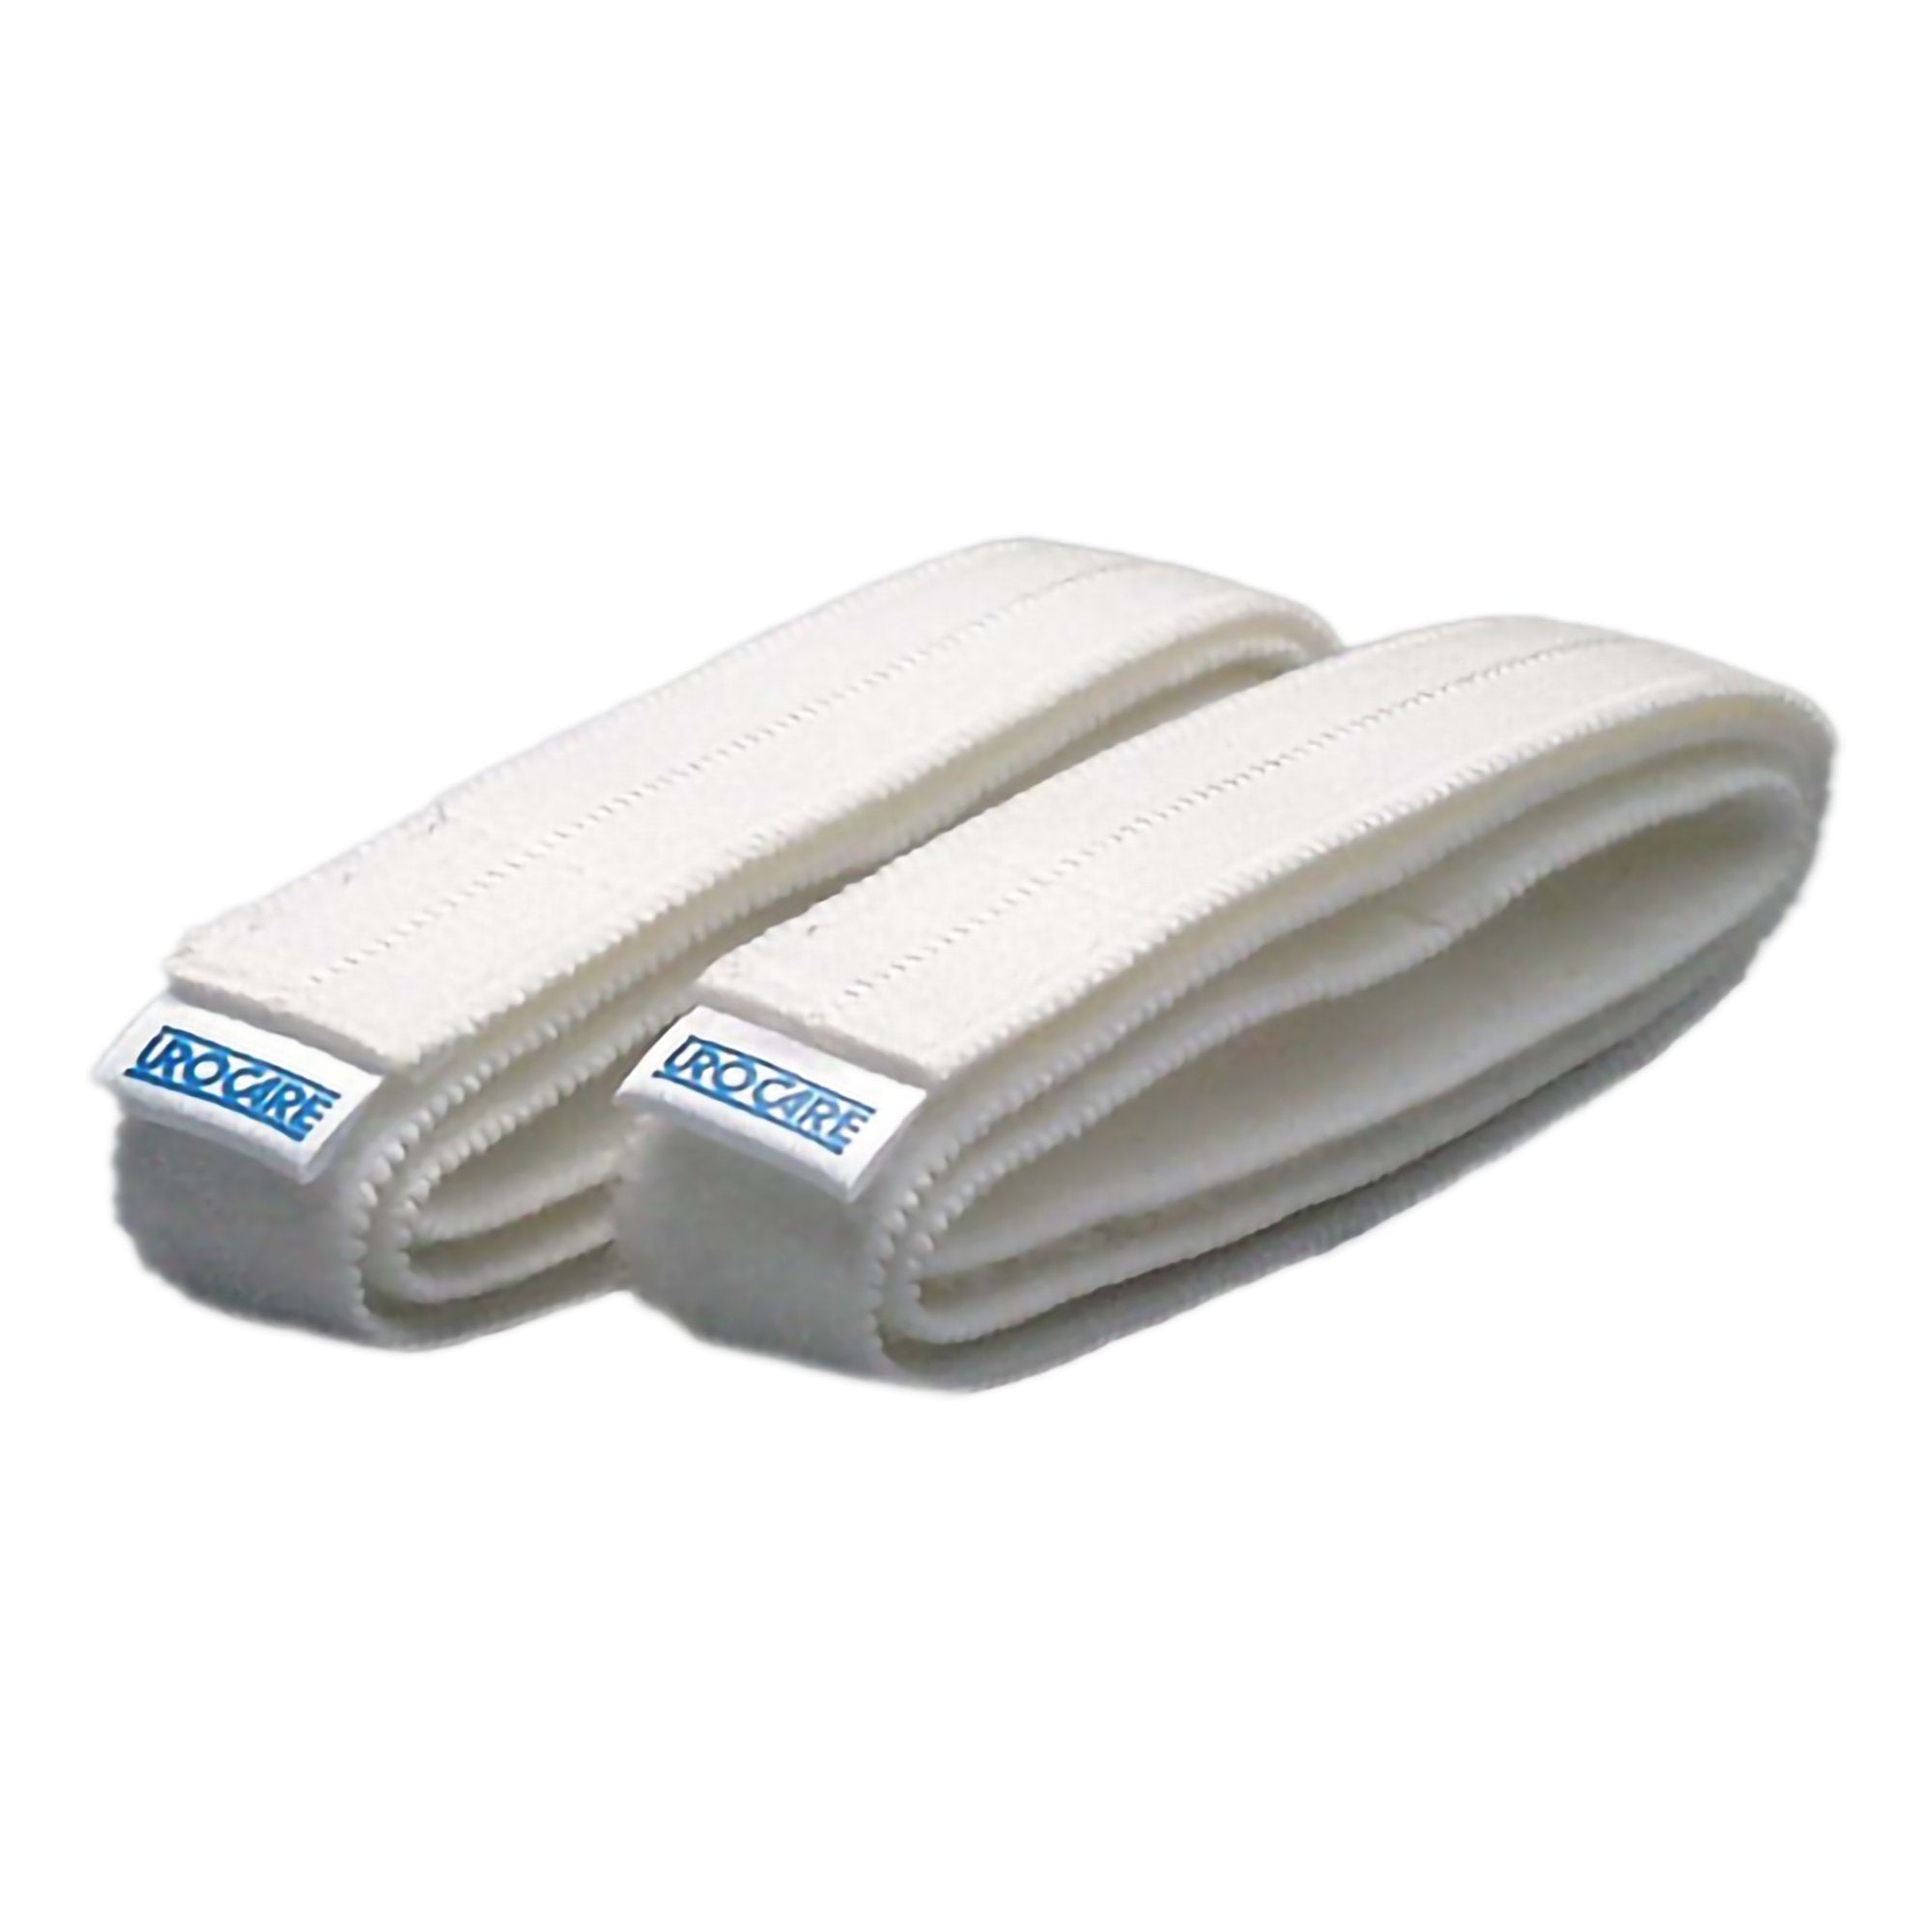 Leg Bag Strap Urocare® NonSterile, Fits: 8 to 24 Inch D